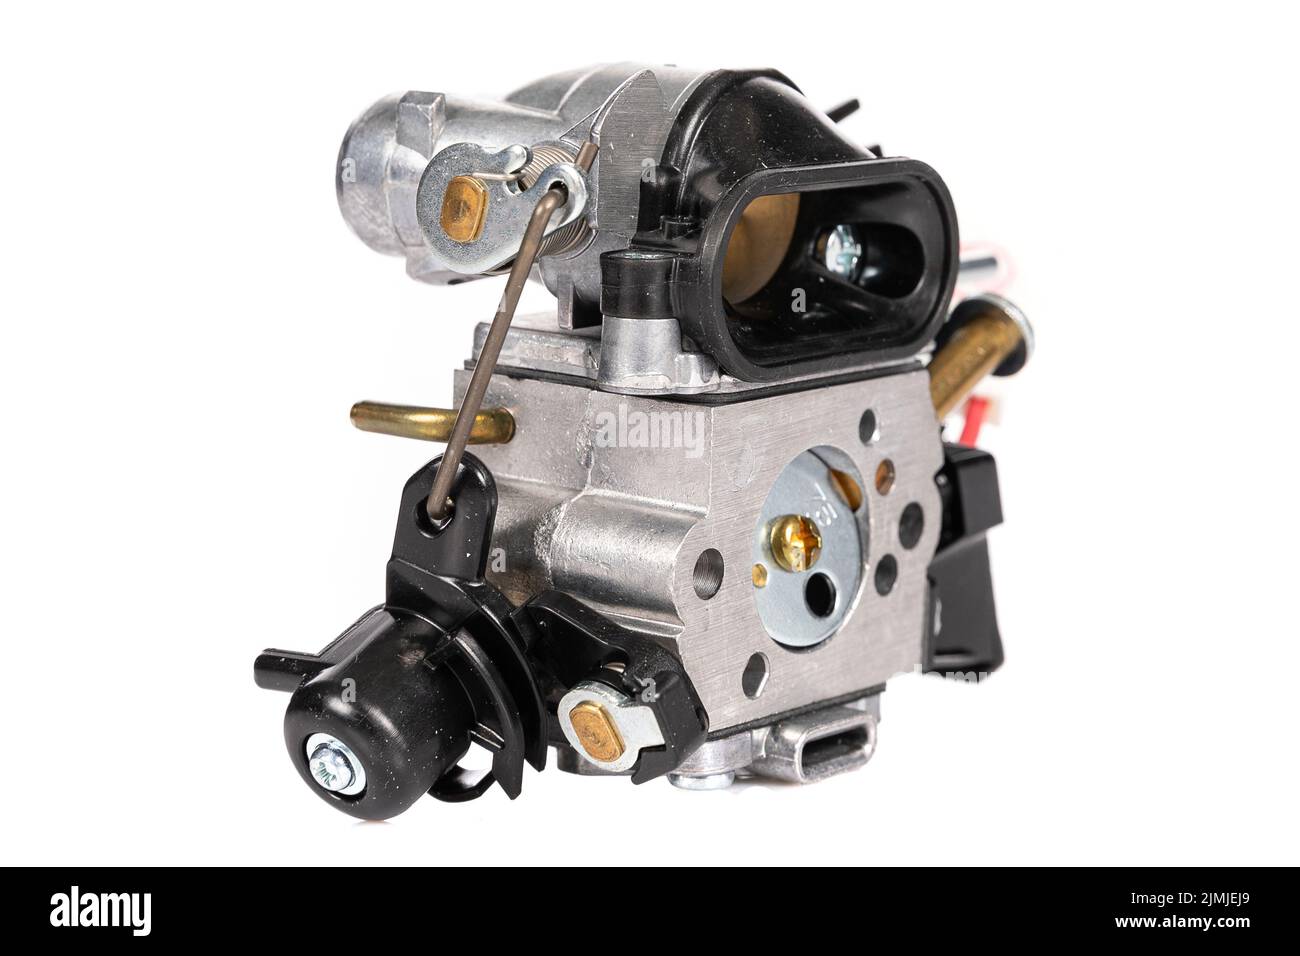 New carburetor for a lawn mower on a white isolated background Stock Photo